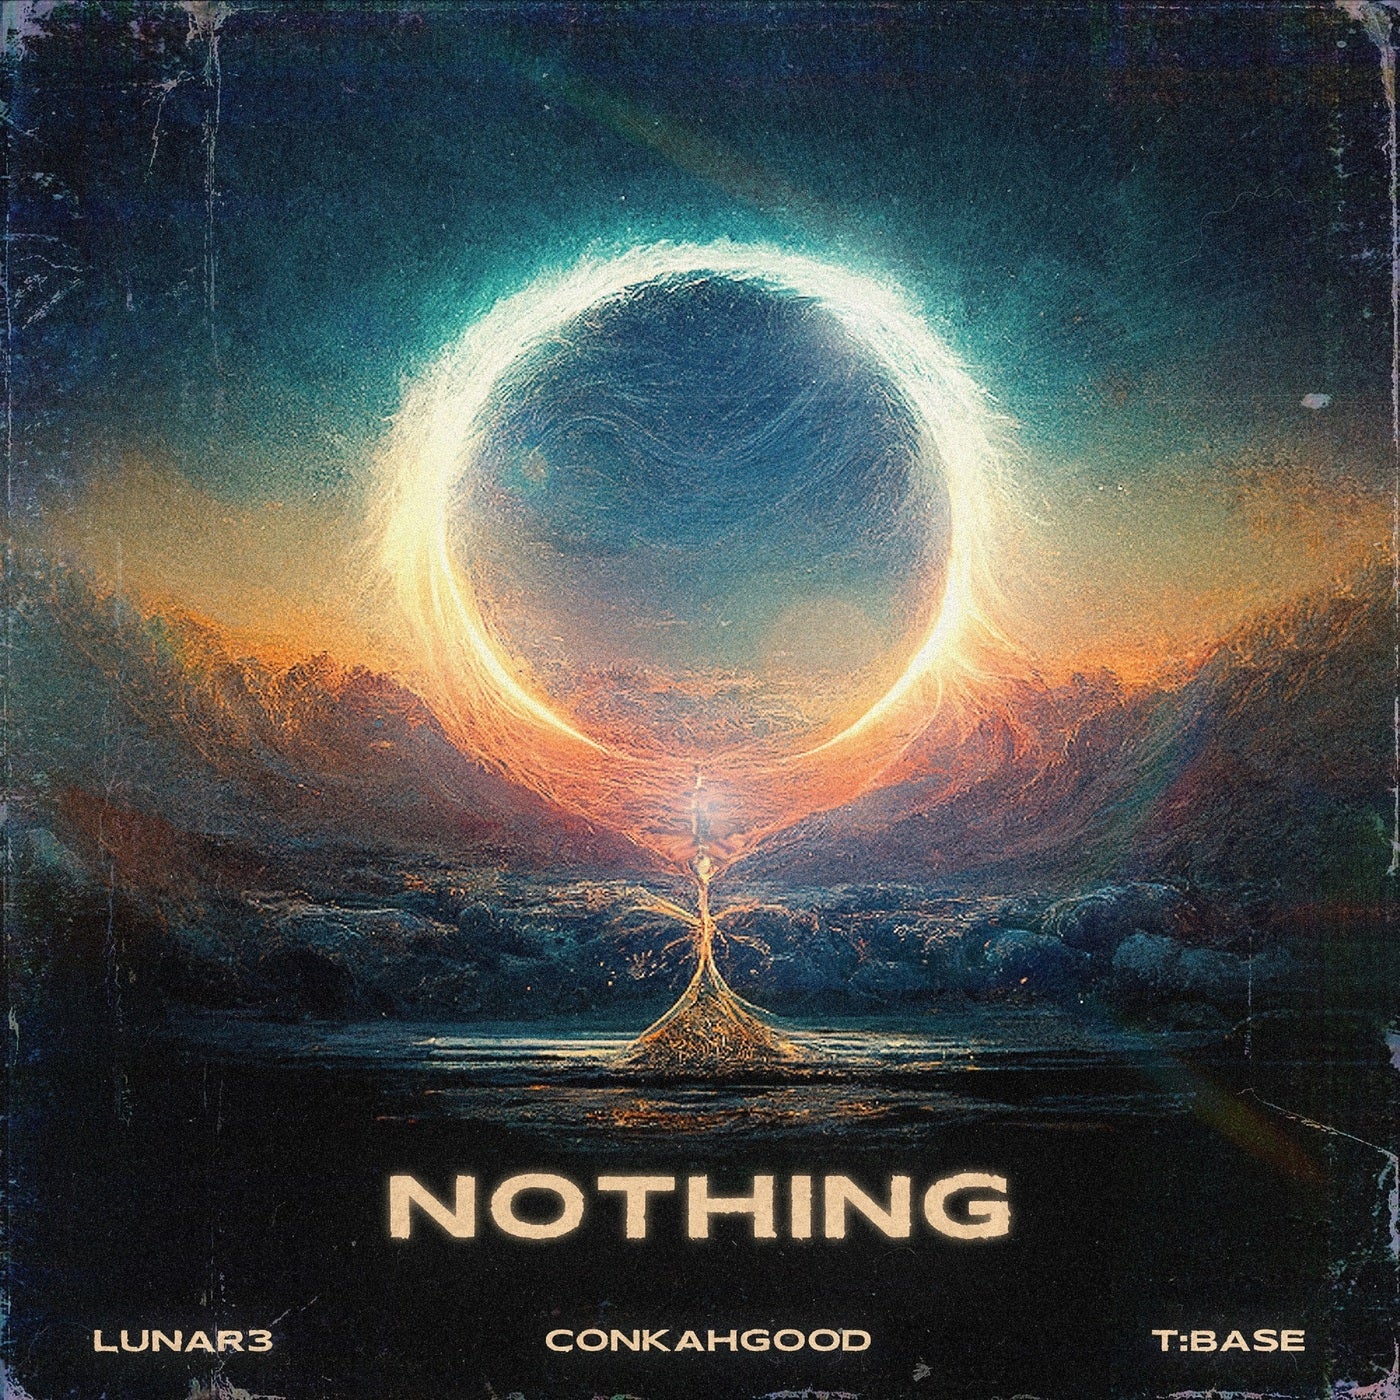 Lunar3 & T base - Nothing (feat. ConkahGood) [C Recordings]